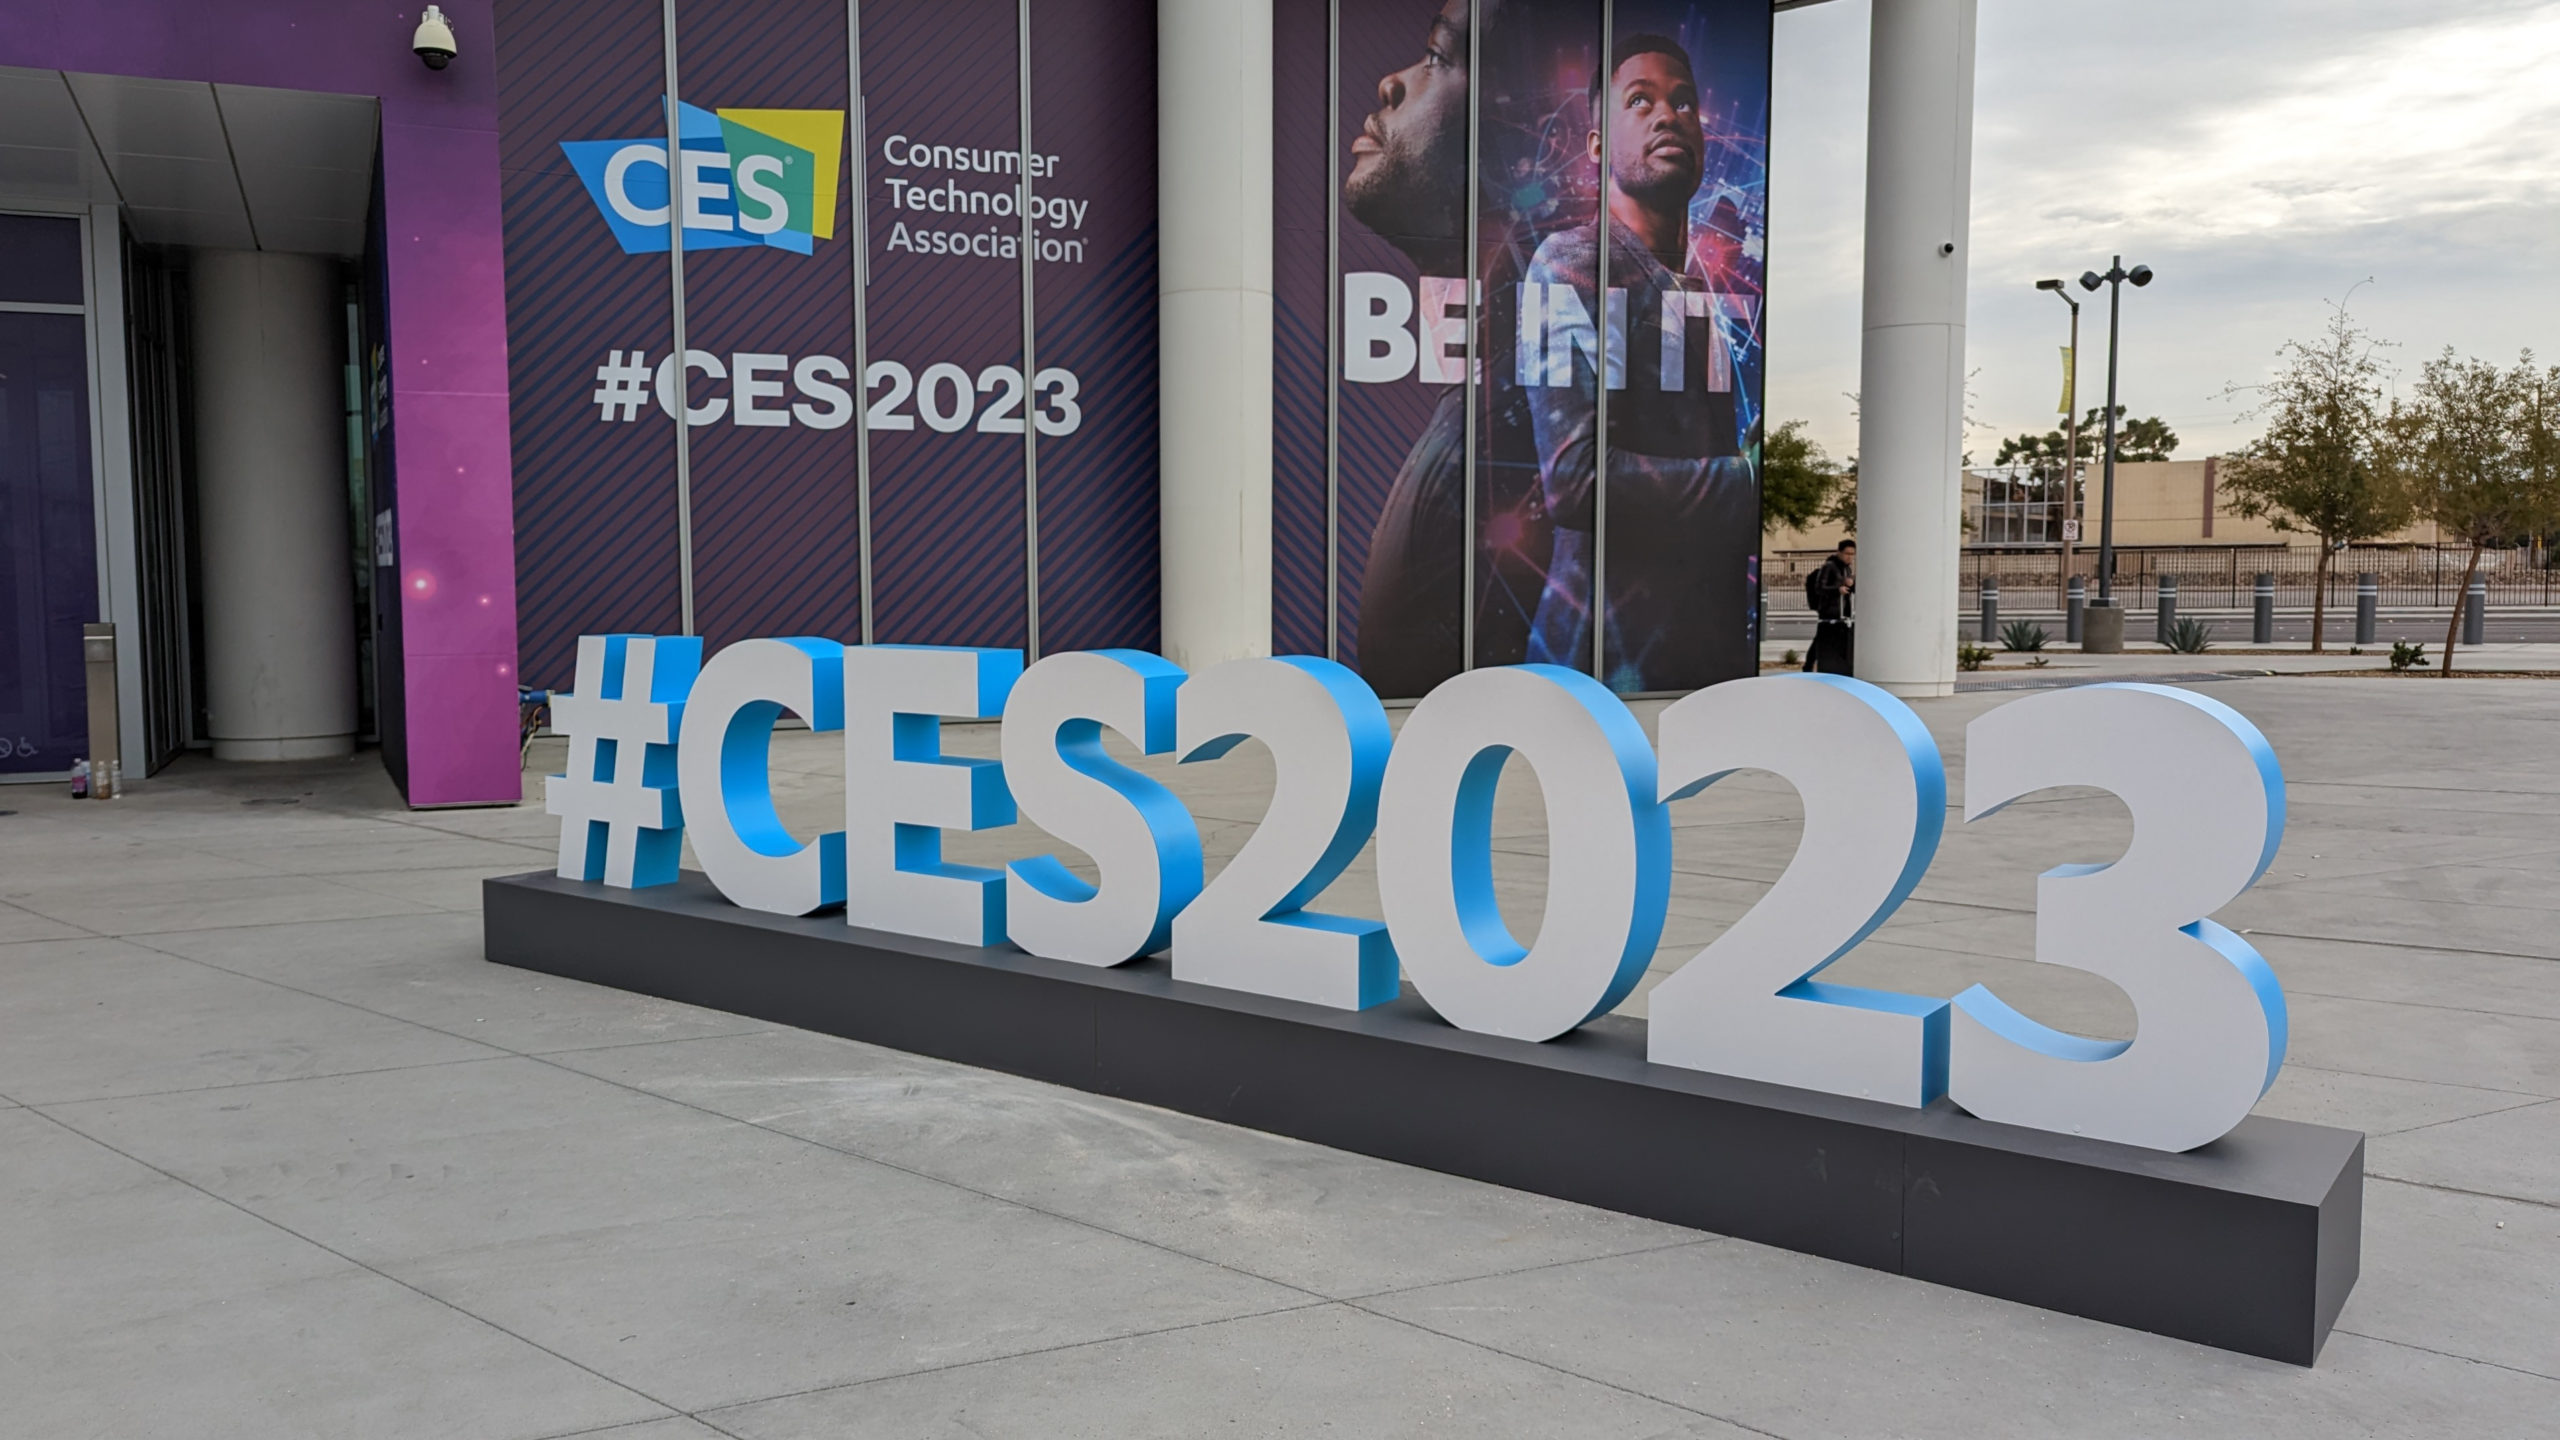 All about CES 2023